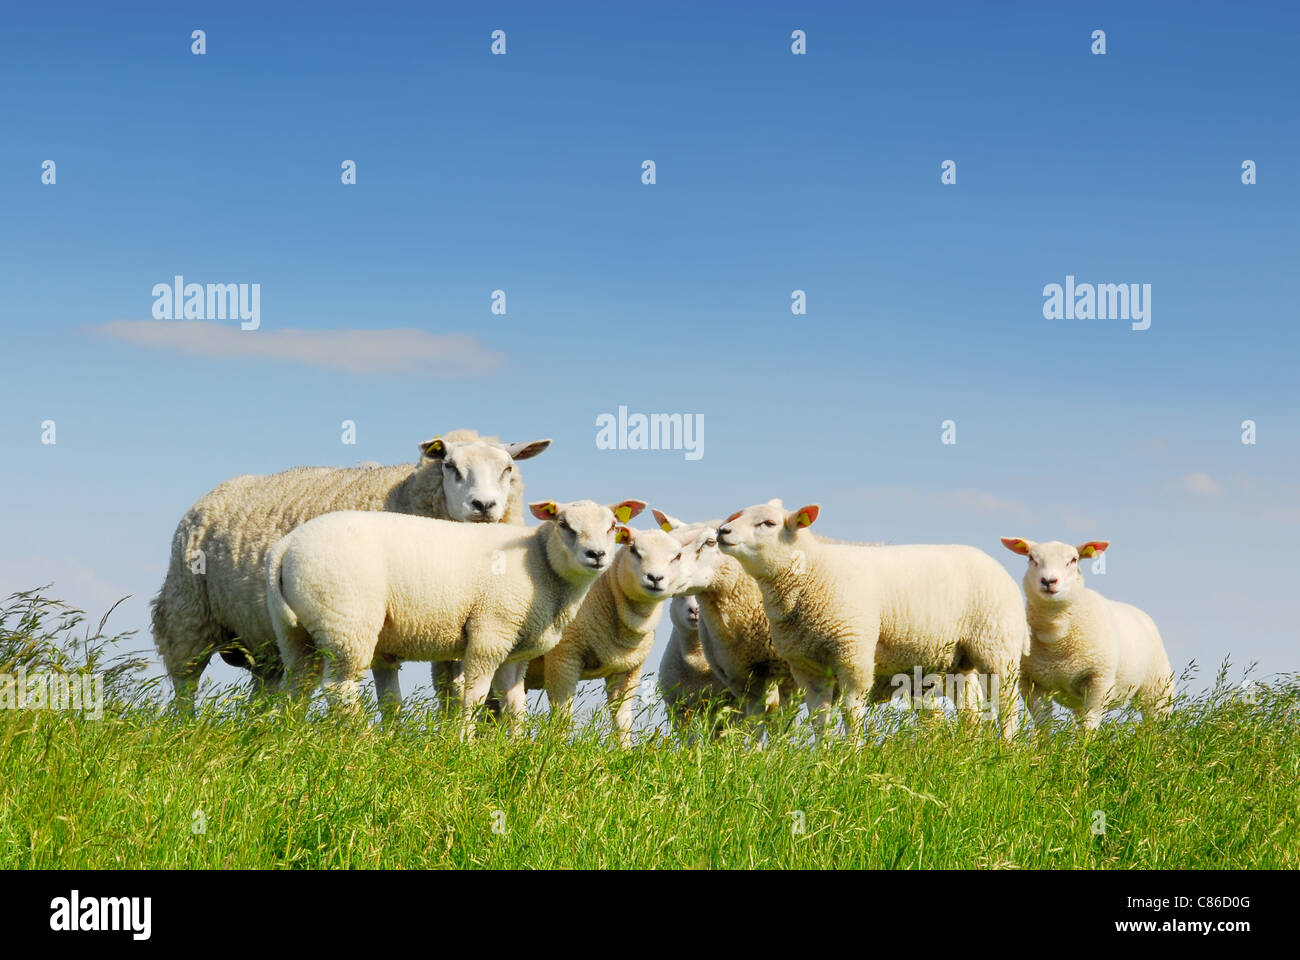 Family gathering of sheep on green meadow with blue sky on dutch island Texel Stock Photo